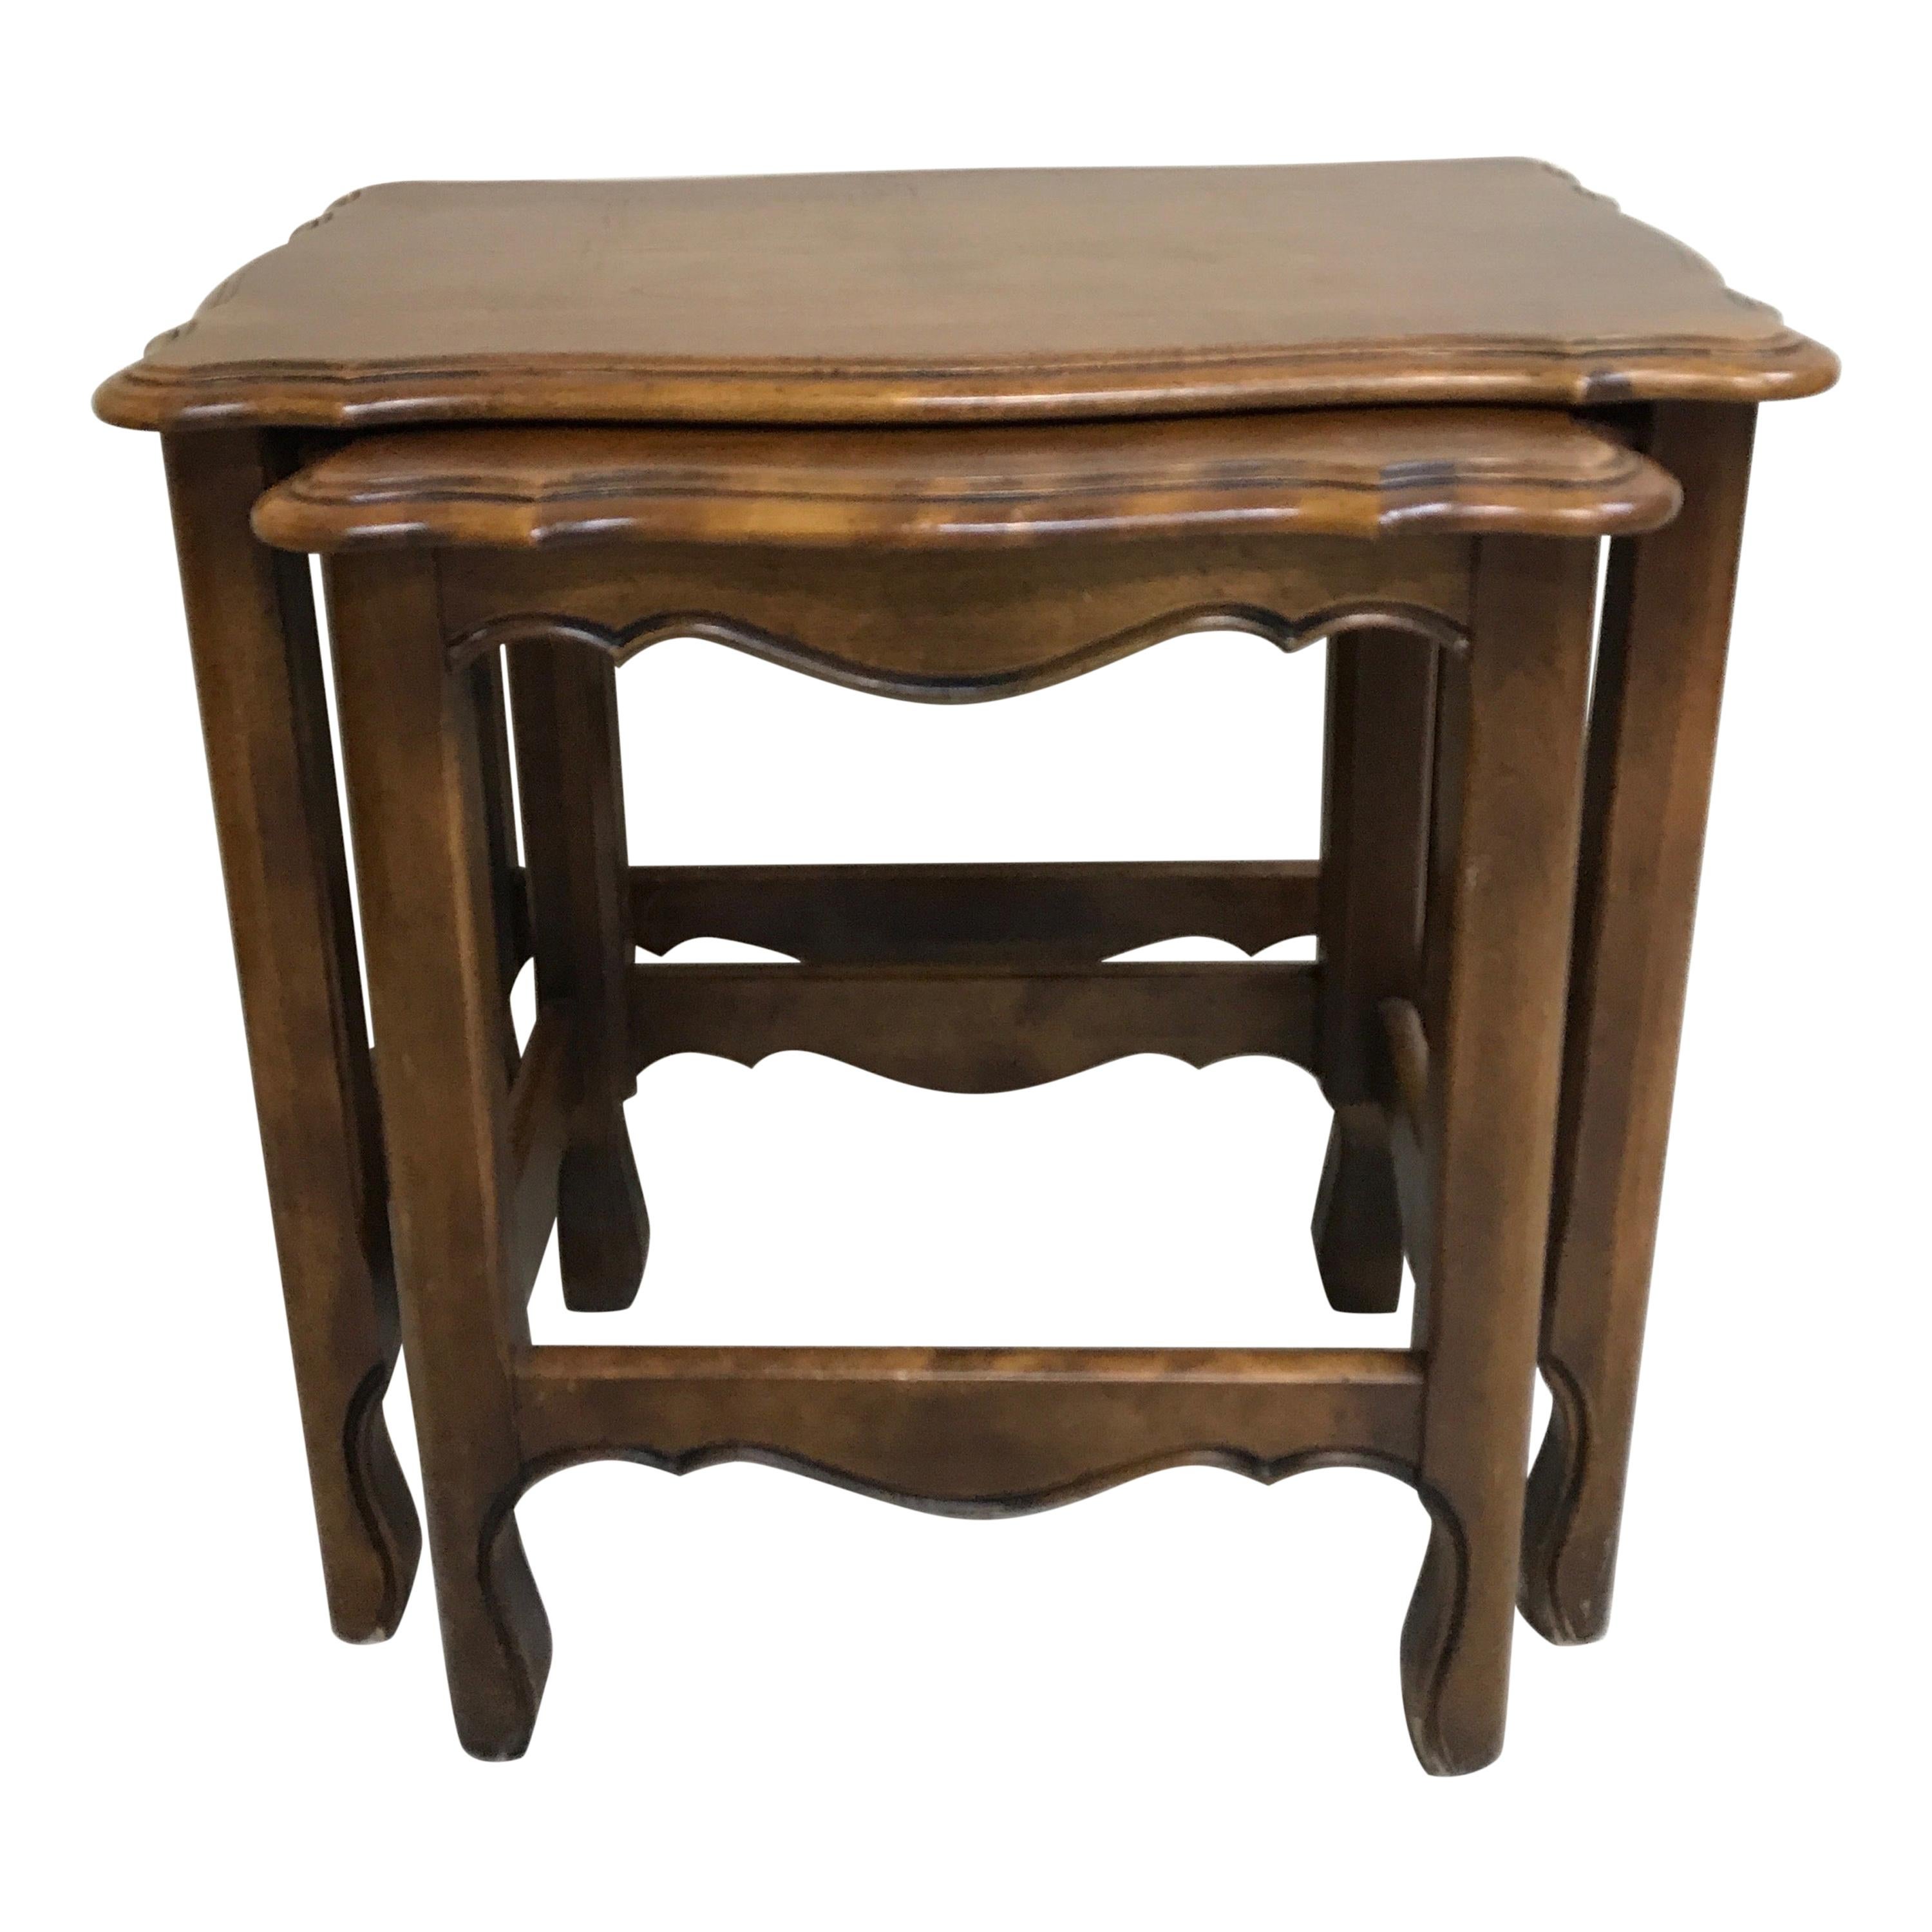 Country French Stacking Tables